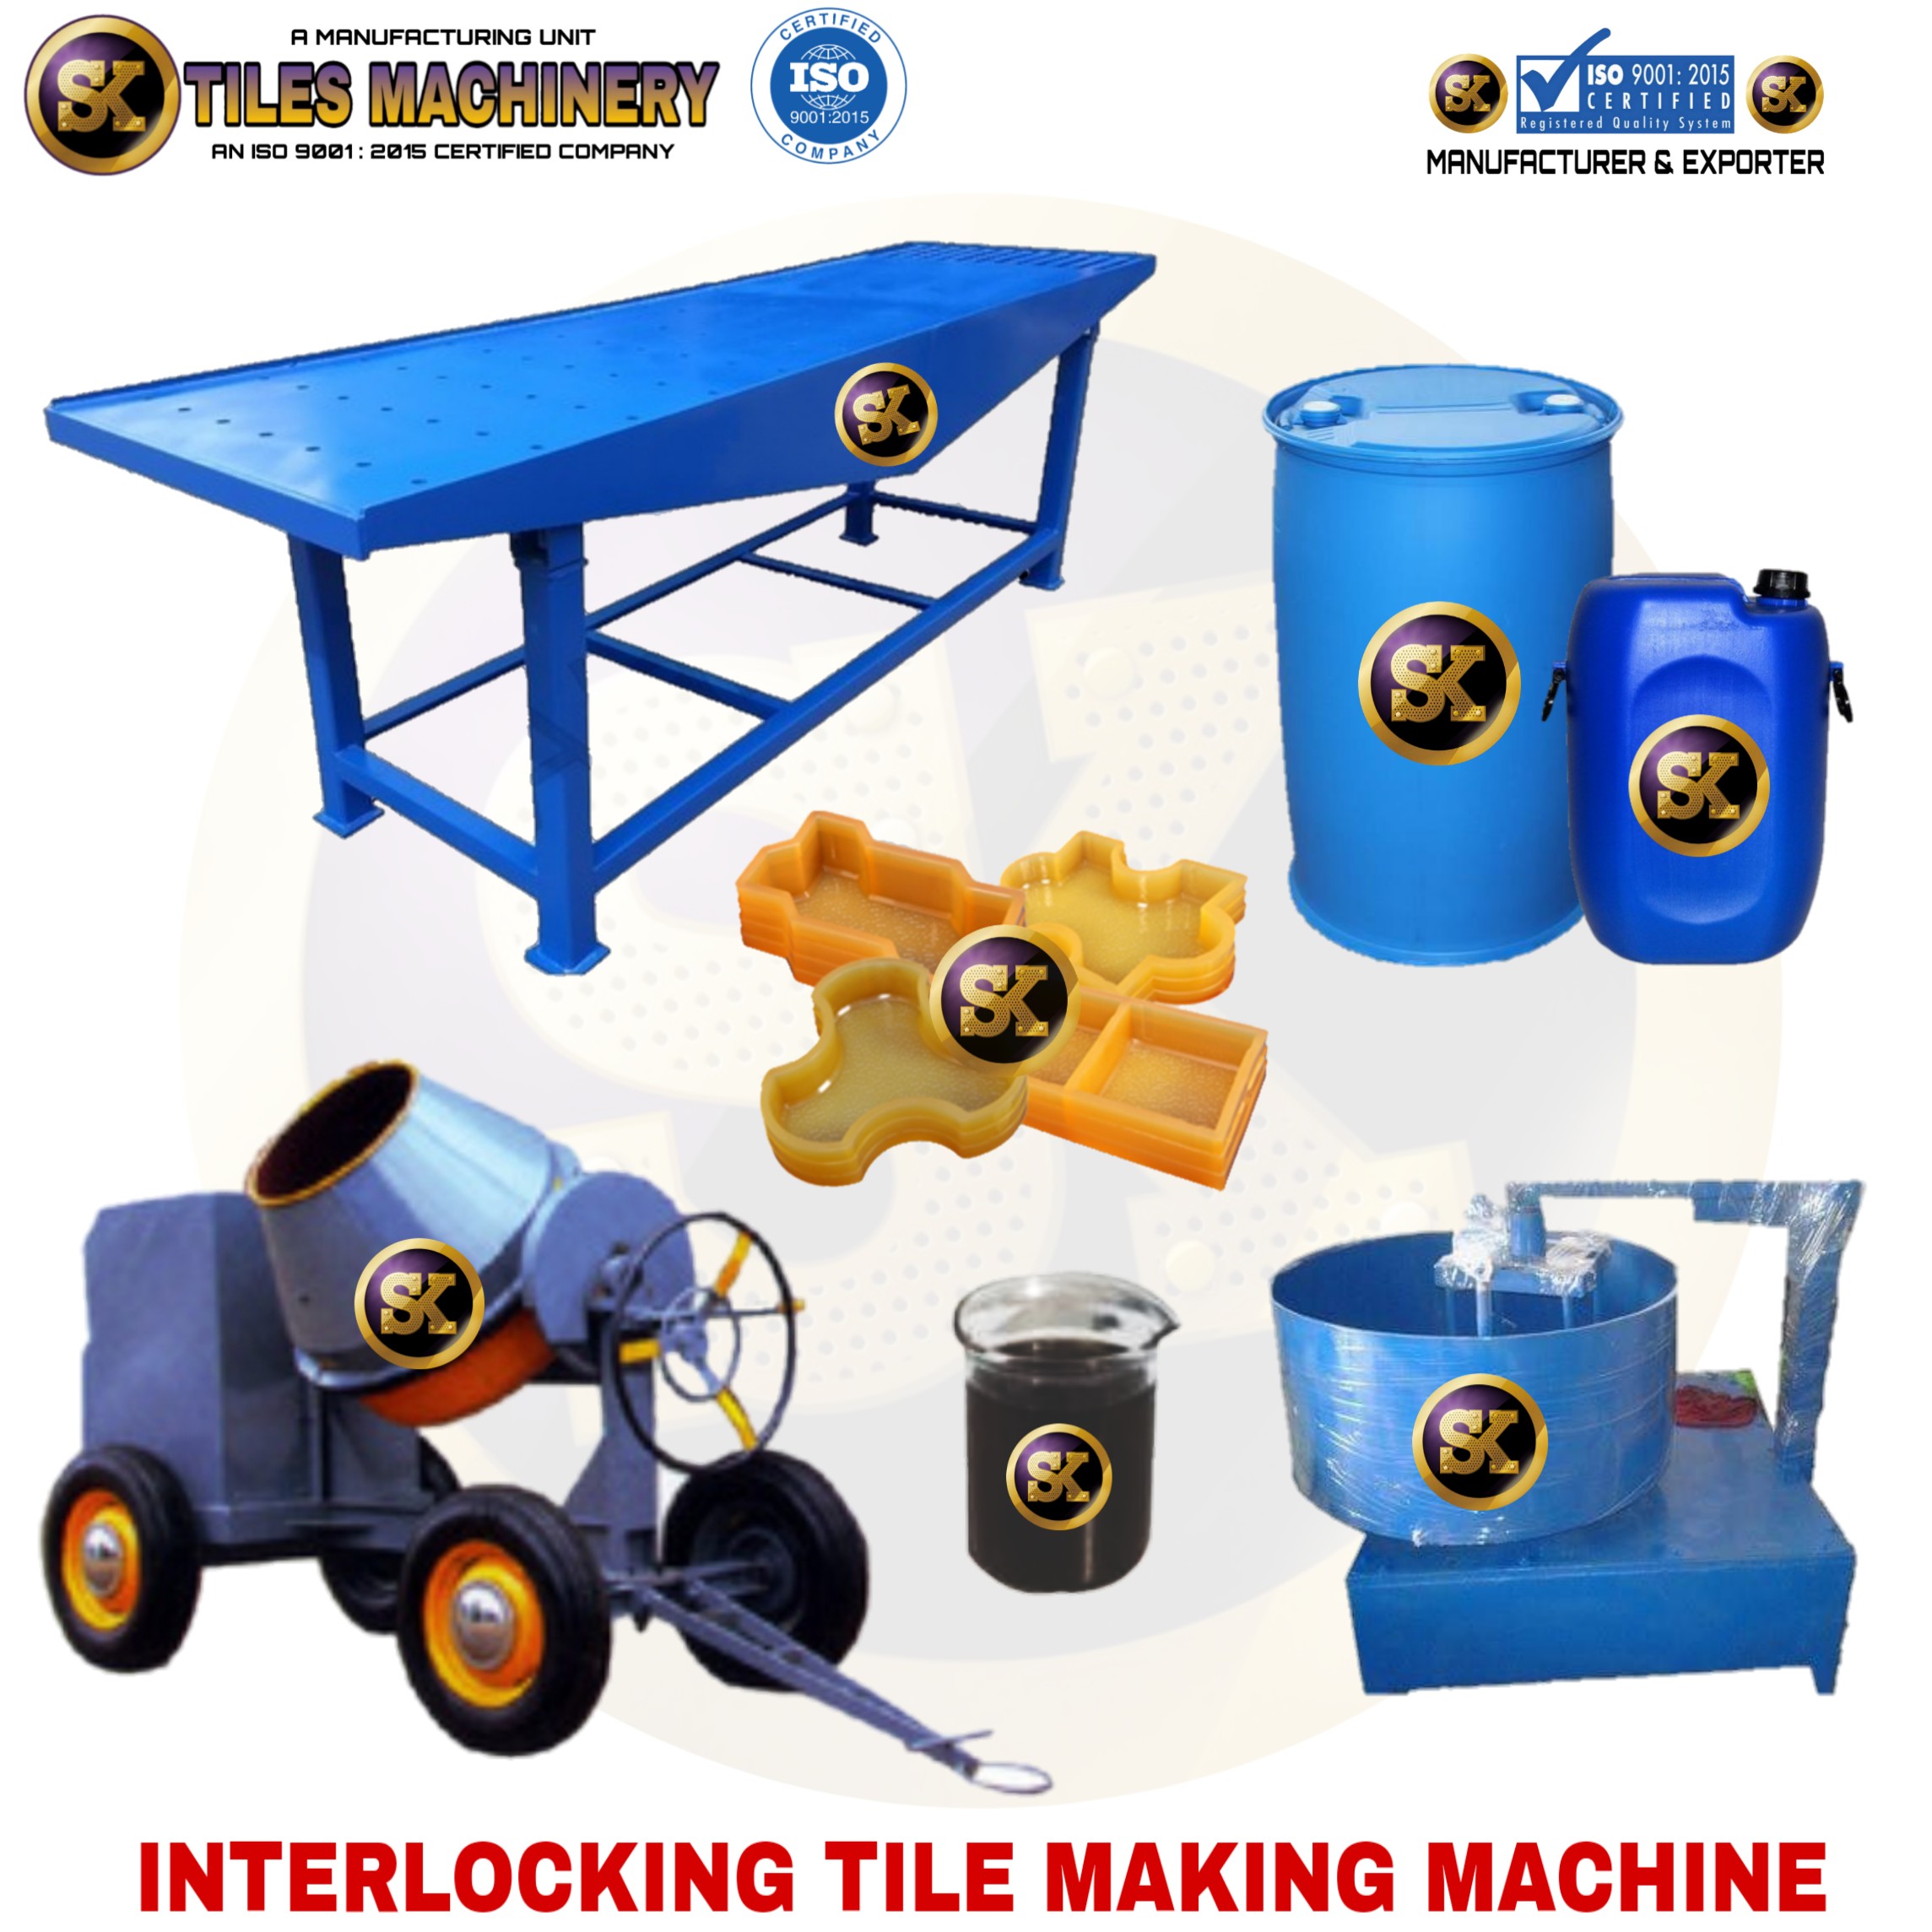 SK Tile Machinery